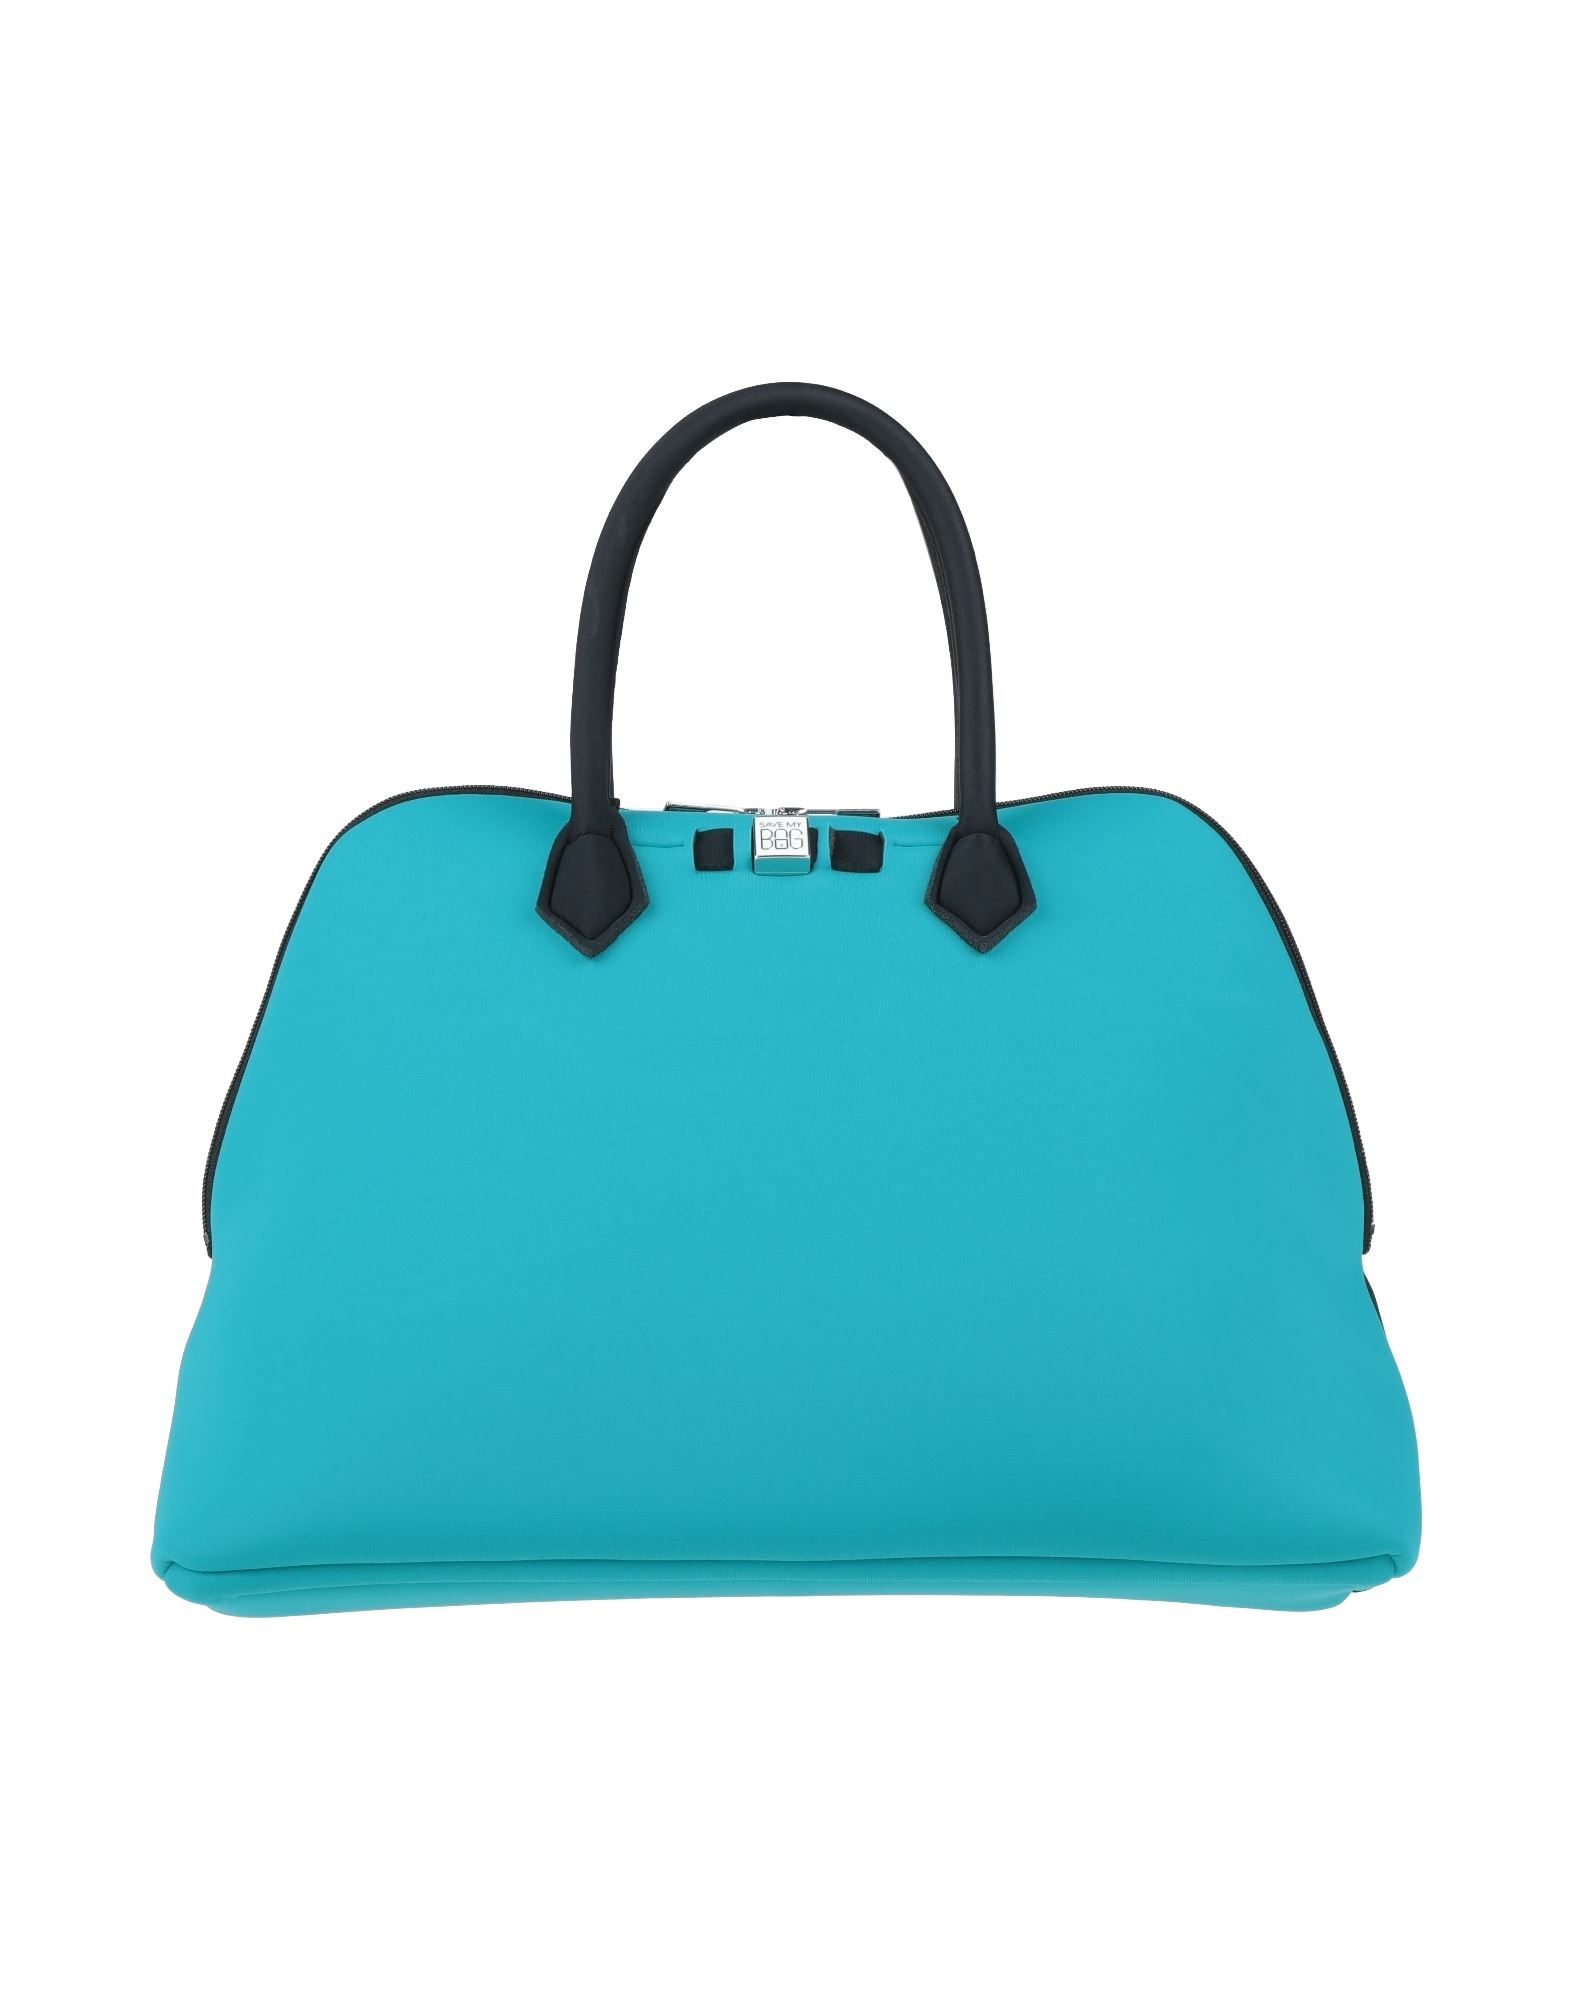 Save My Bag Handbags In Turquoise